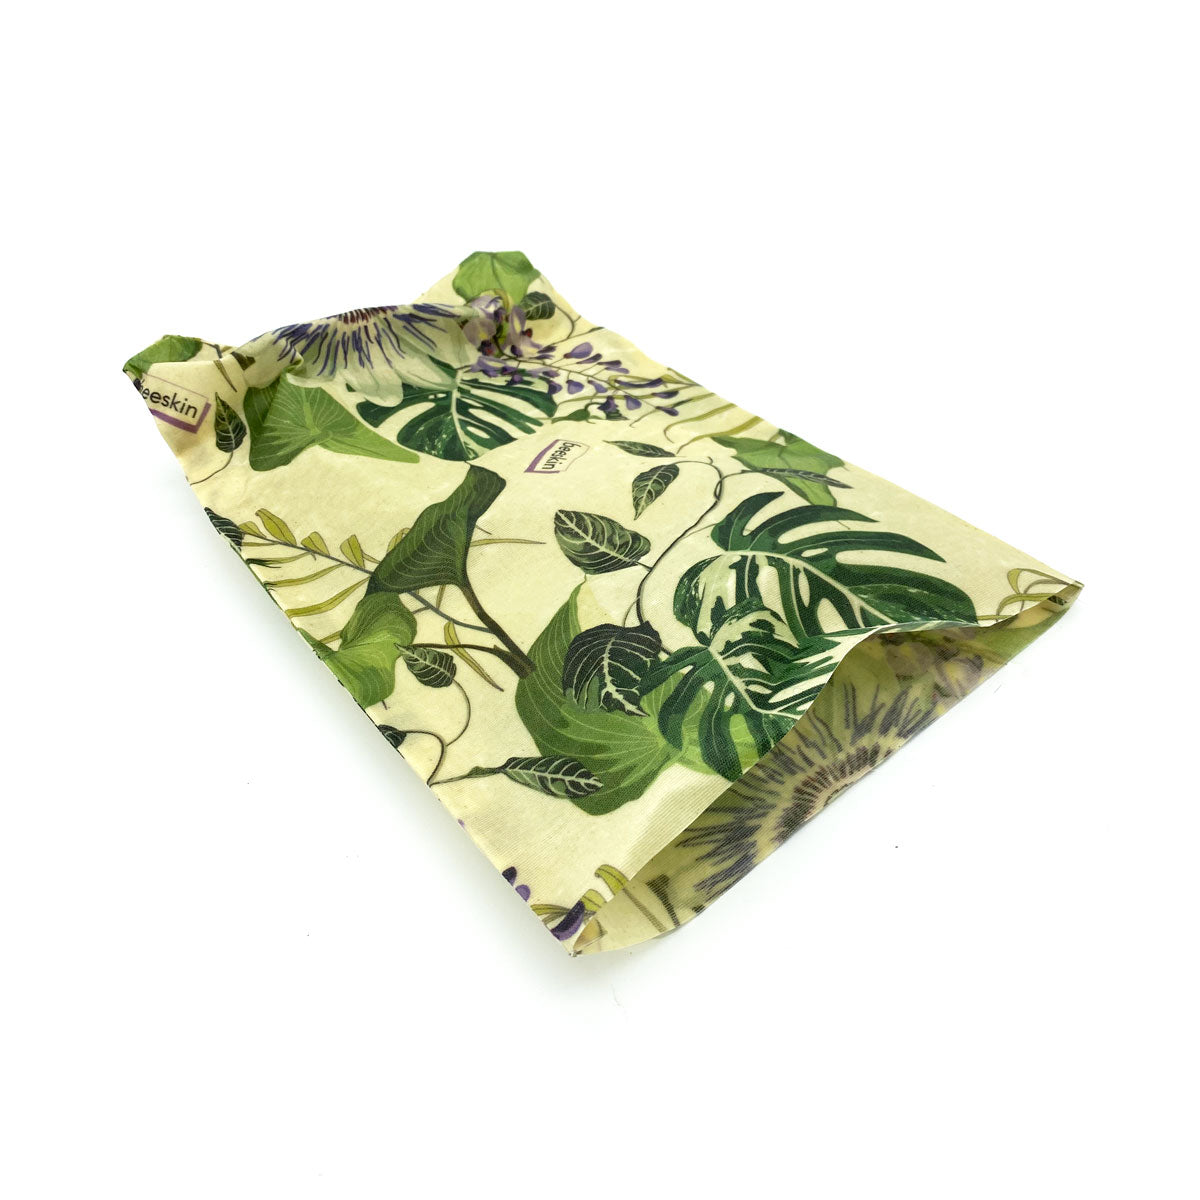 beeskin beeswax wrap passionflower on white background